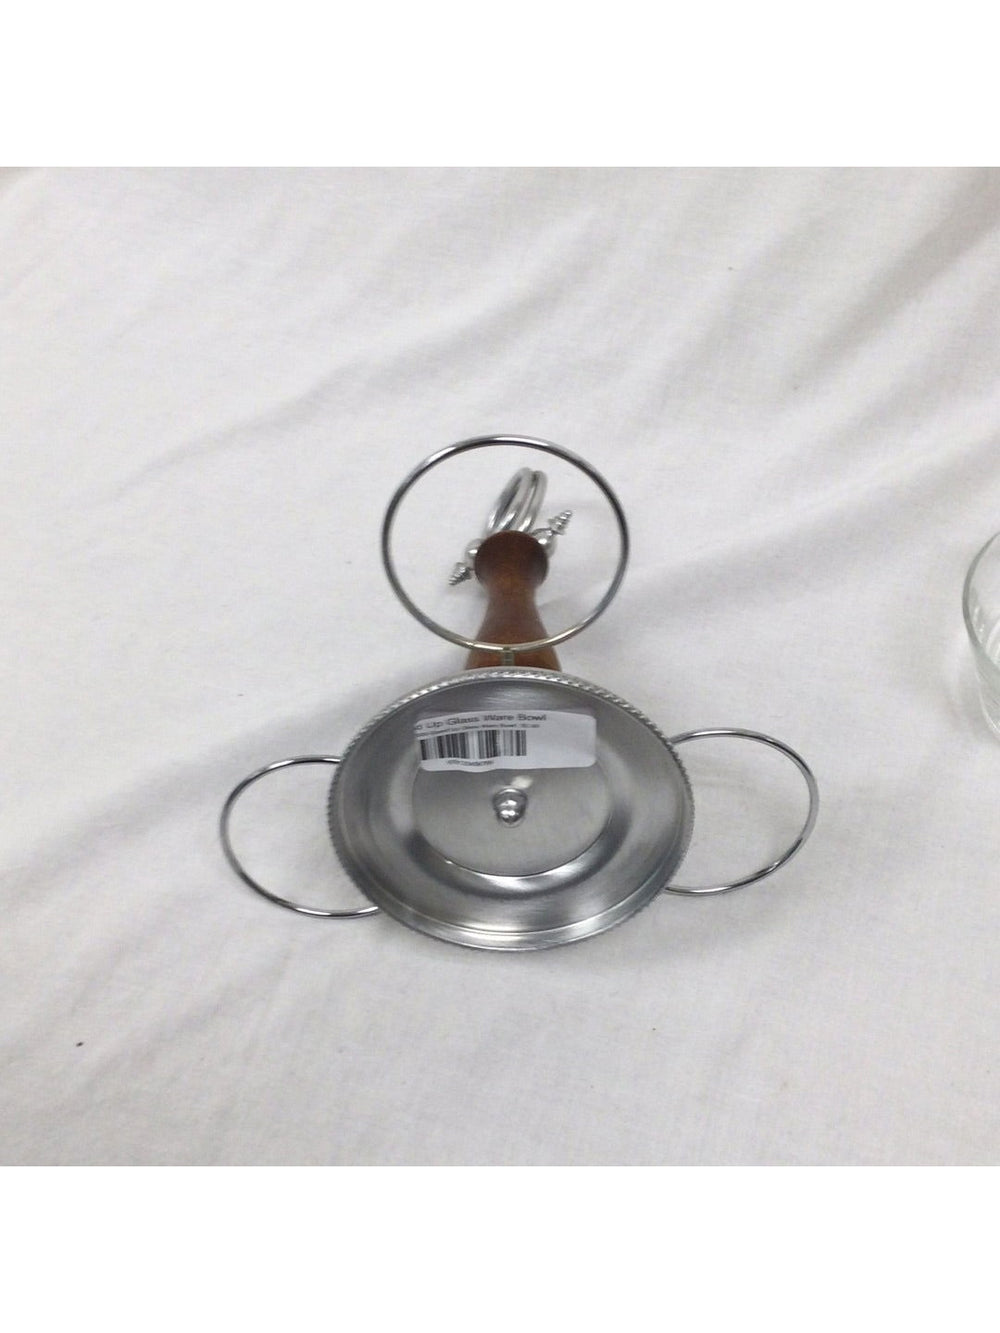 Stand Up Glass Ware Bowl - The Kennedy Collective Thrift - 